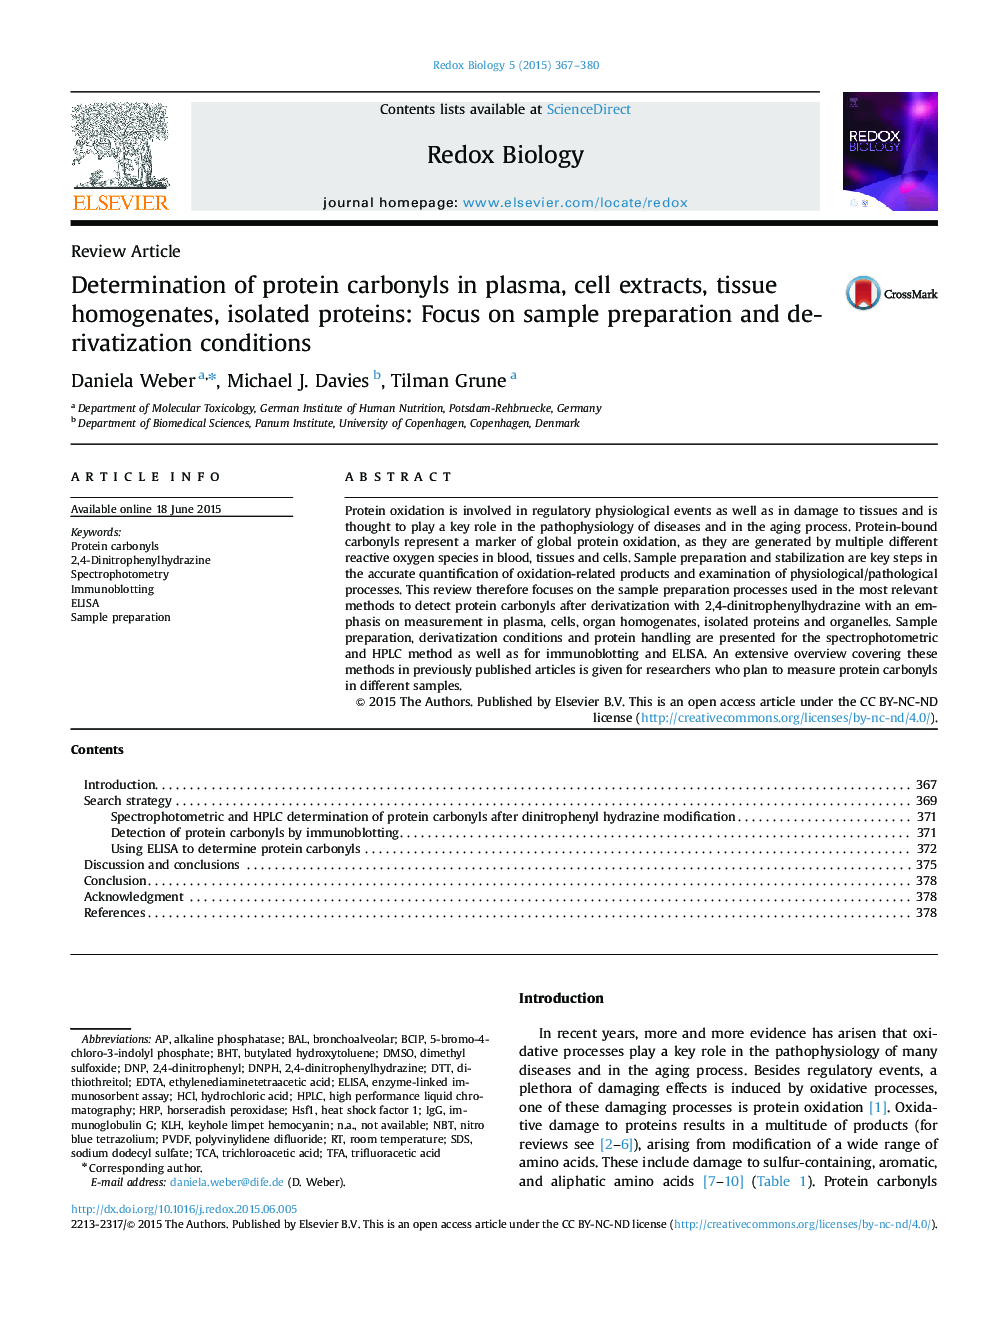 Determination of protein carbonyls in plasma, cell extracts, tissue homogenates, isolated proteins: Focus on sample preparation and derivatization conditions